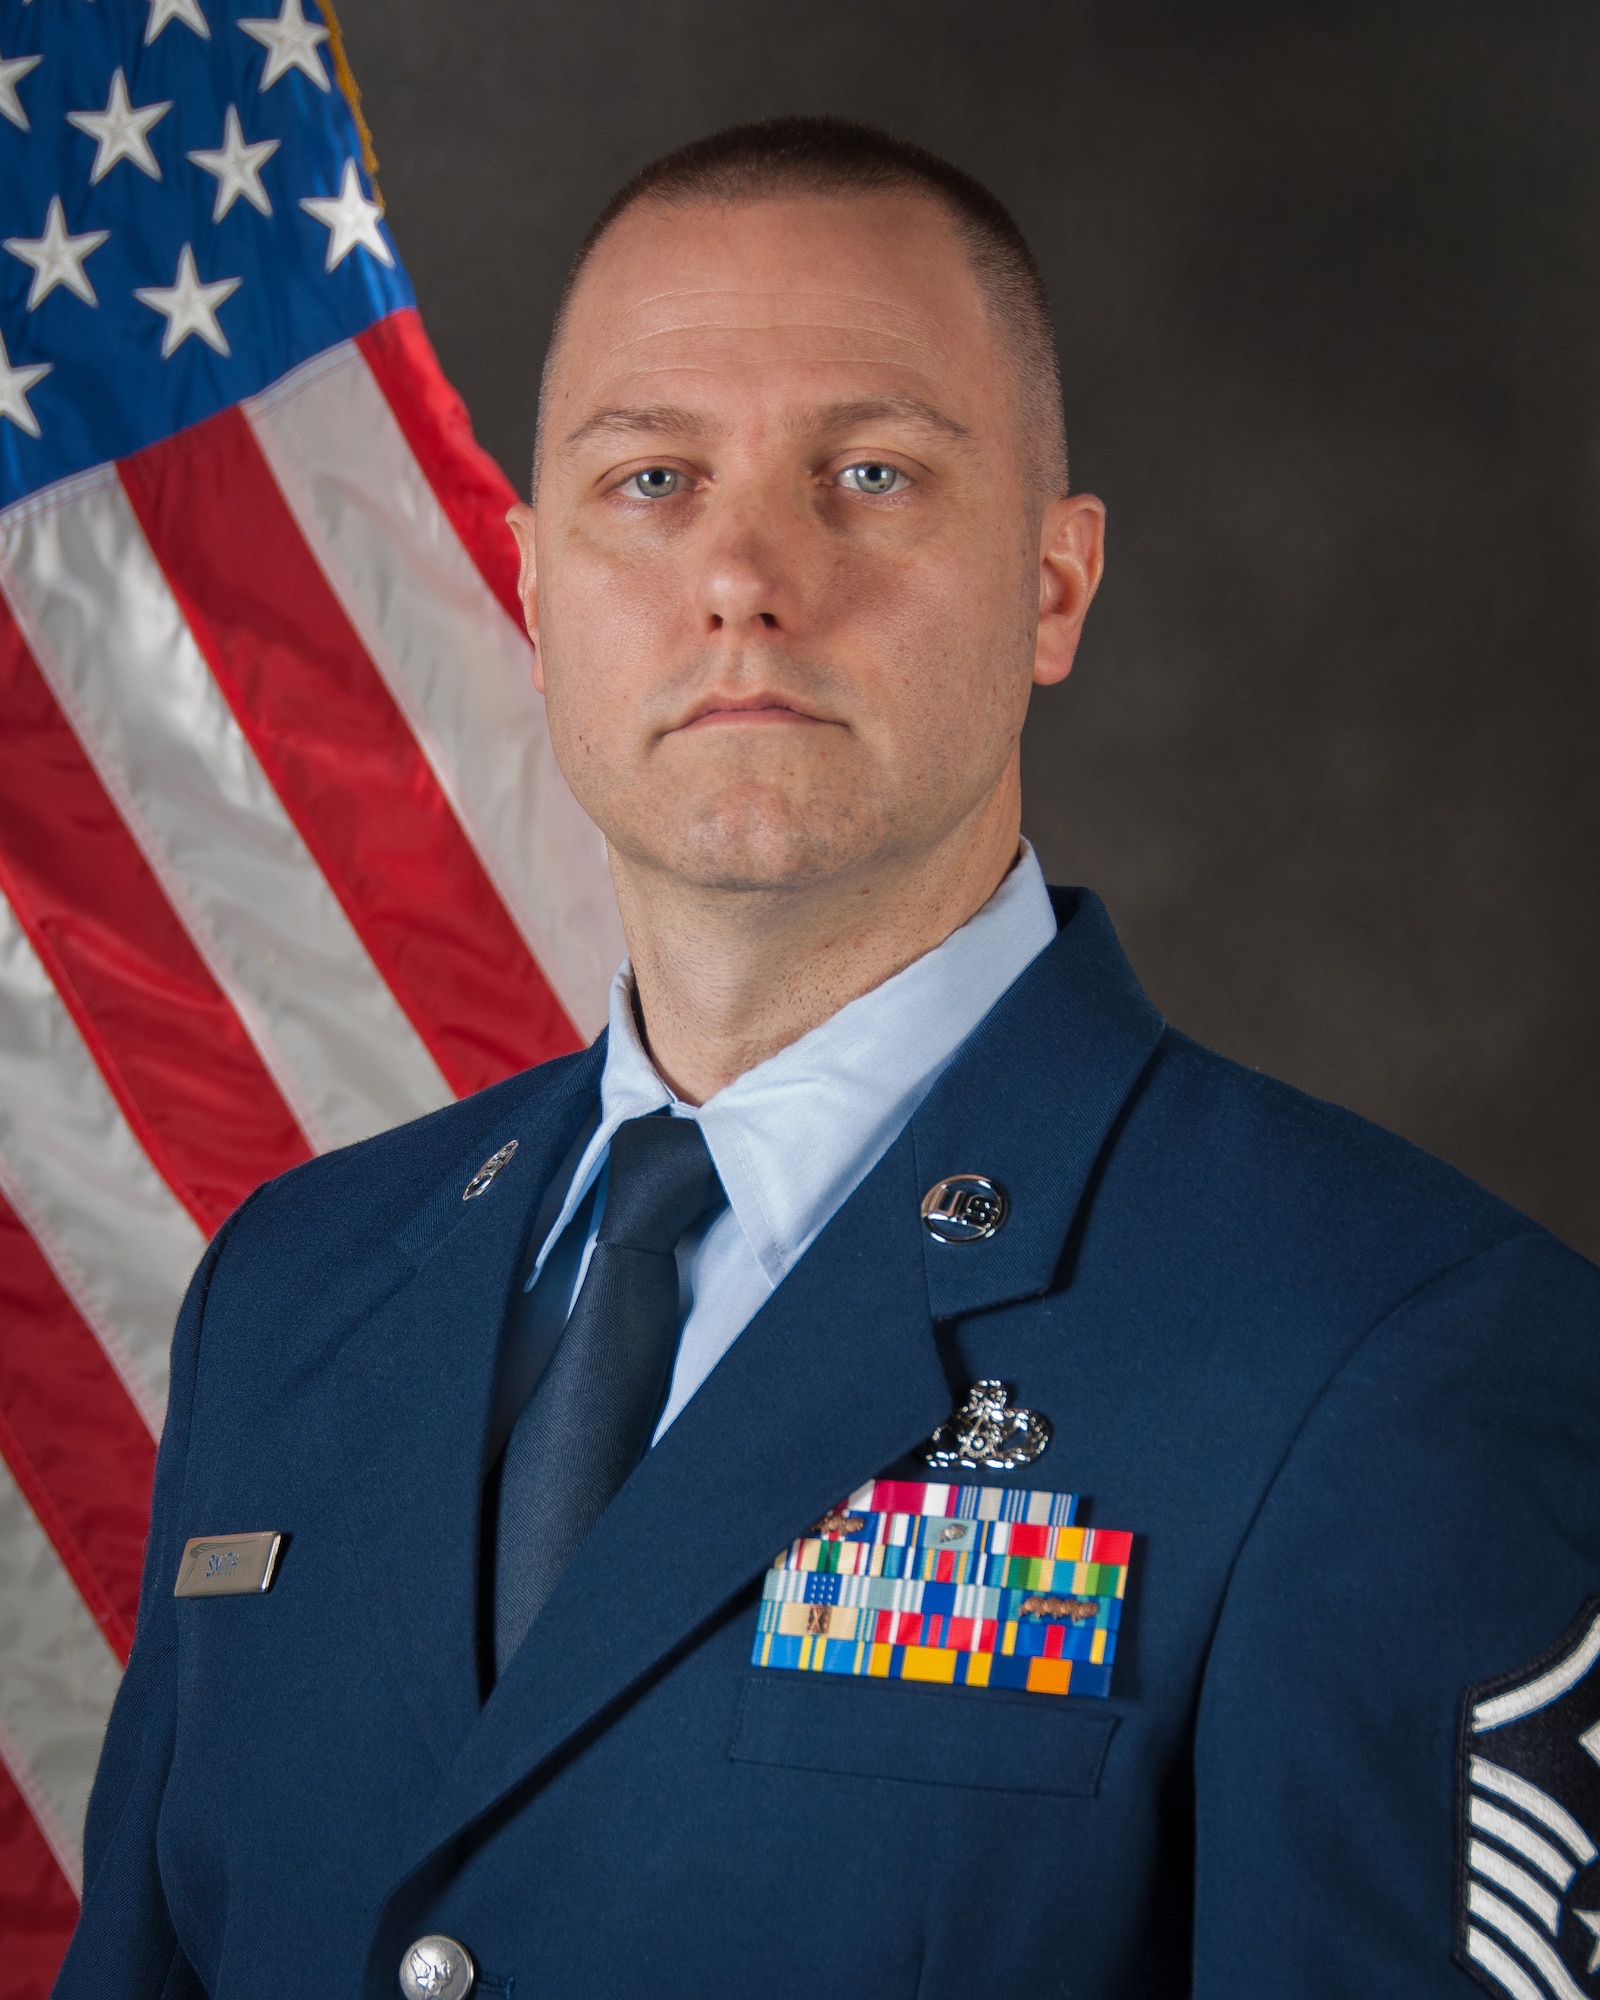 Master Sgt. Alan Smith of the 123rd Civil Engineer Squadron has been selected as the Kentucky Air National Guard’s 2015 First Sergeant of the Year. (U.S. Air National Guard Photo by Master Sgt. Phil Speck)